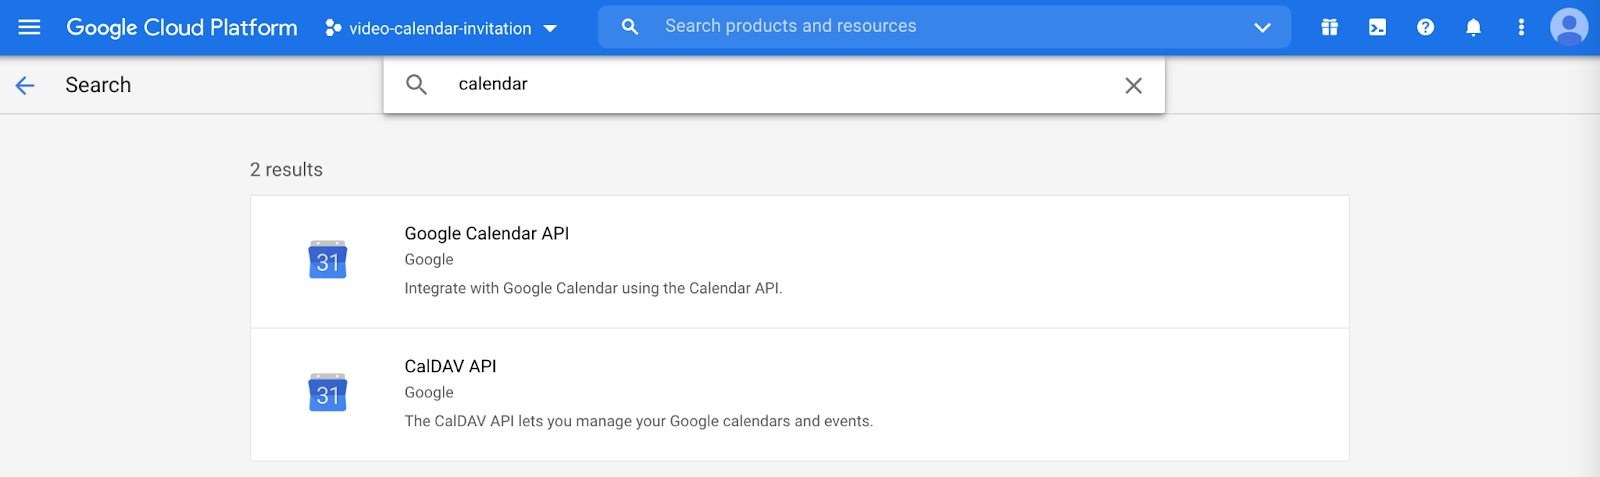 Search results for query "calendar"